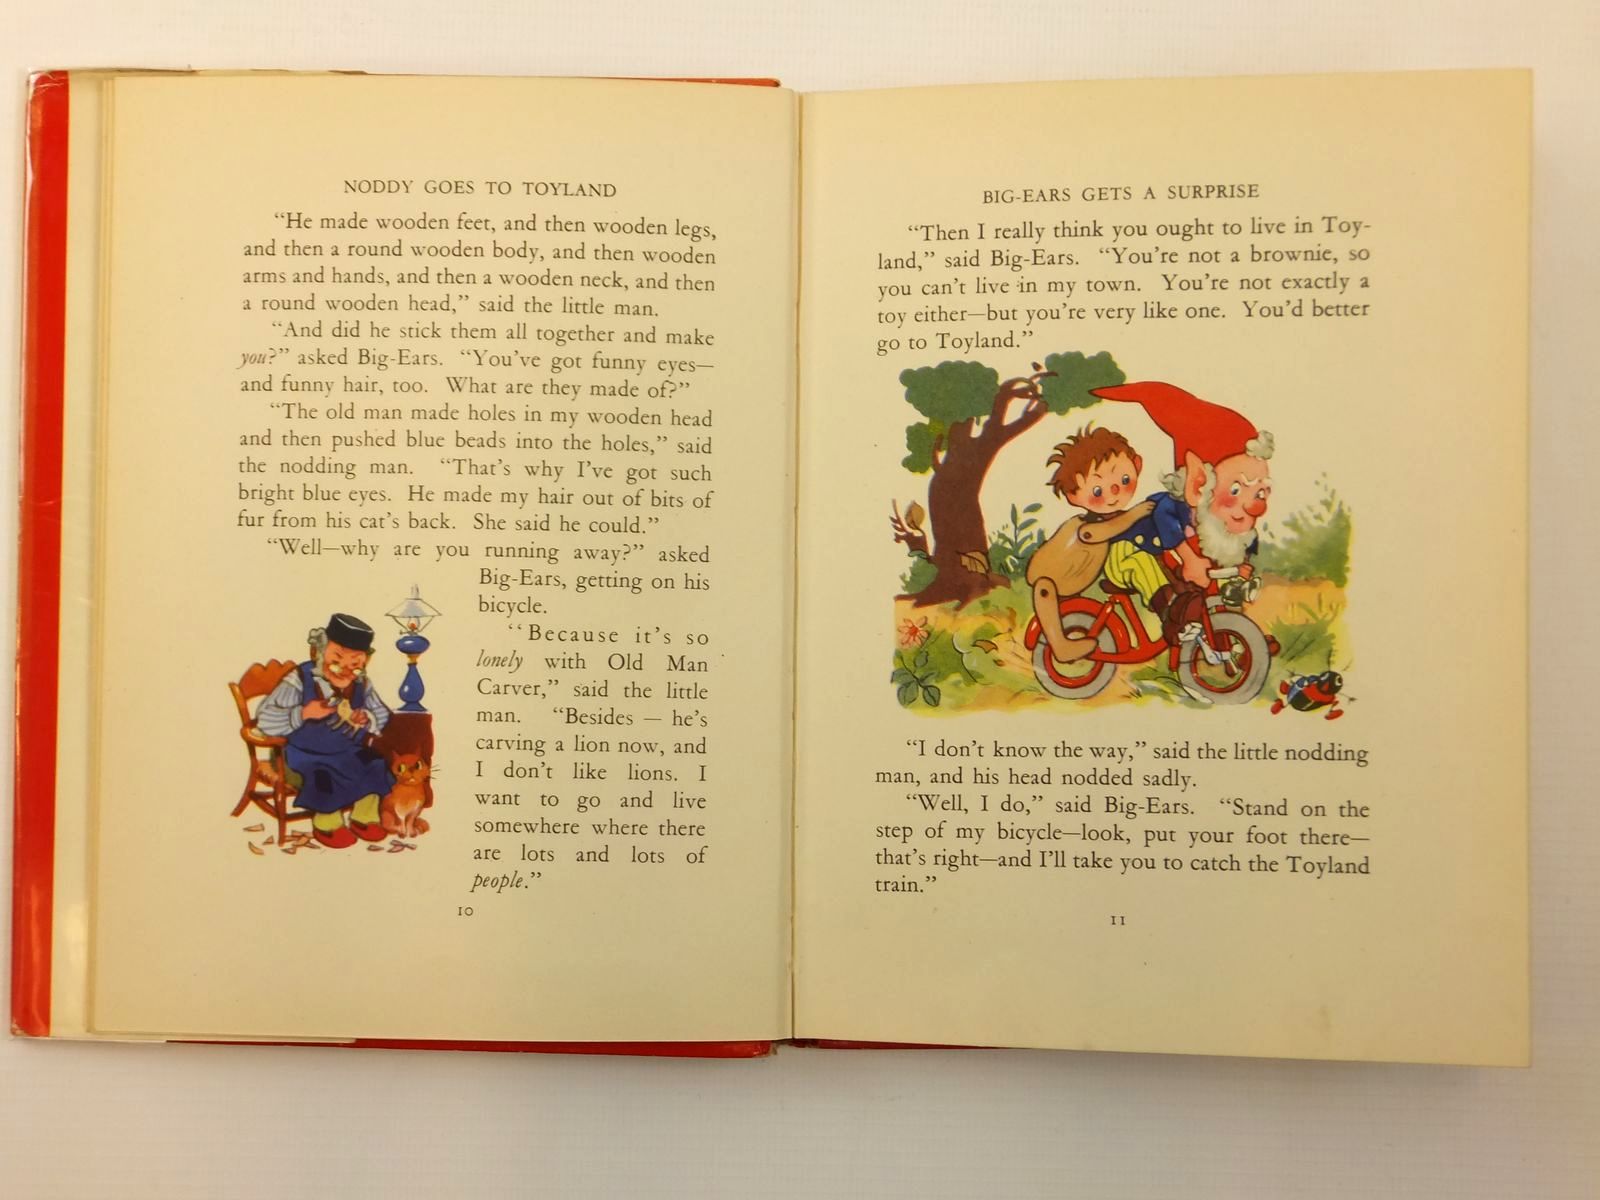 Photo of NODDY GOES TO TOYLAND written by Blyton, Enid illustrated by Beek,  published by Sampson Low, Marston & Co. Ltd. (STOCK CODE: 2121844)  for sale by Stella & Rose's Books